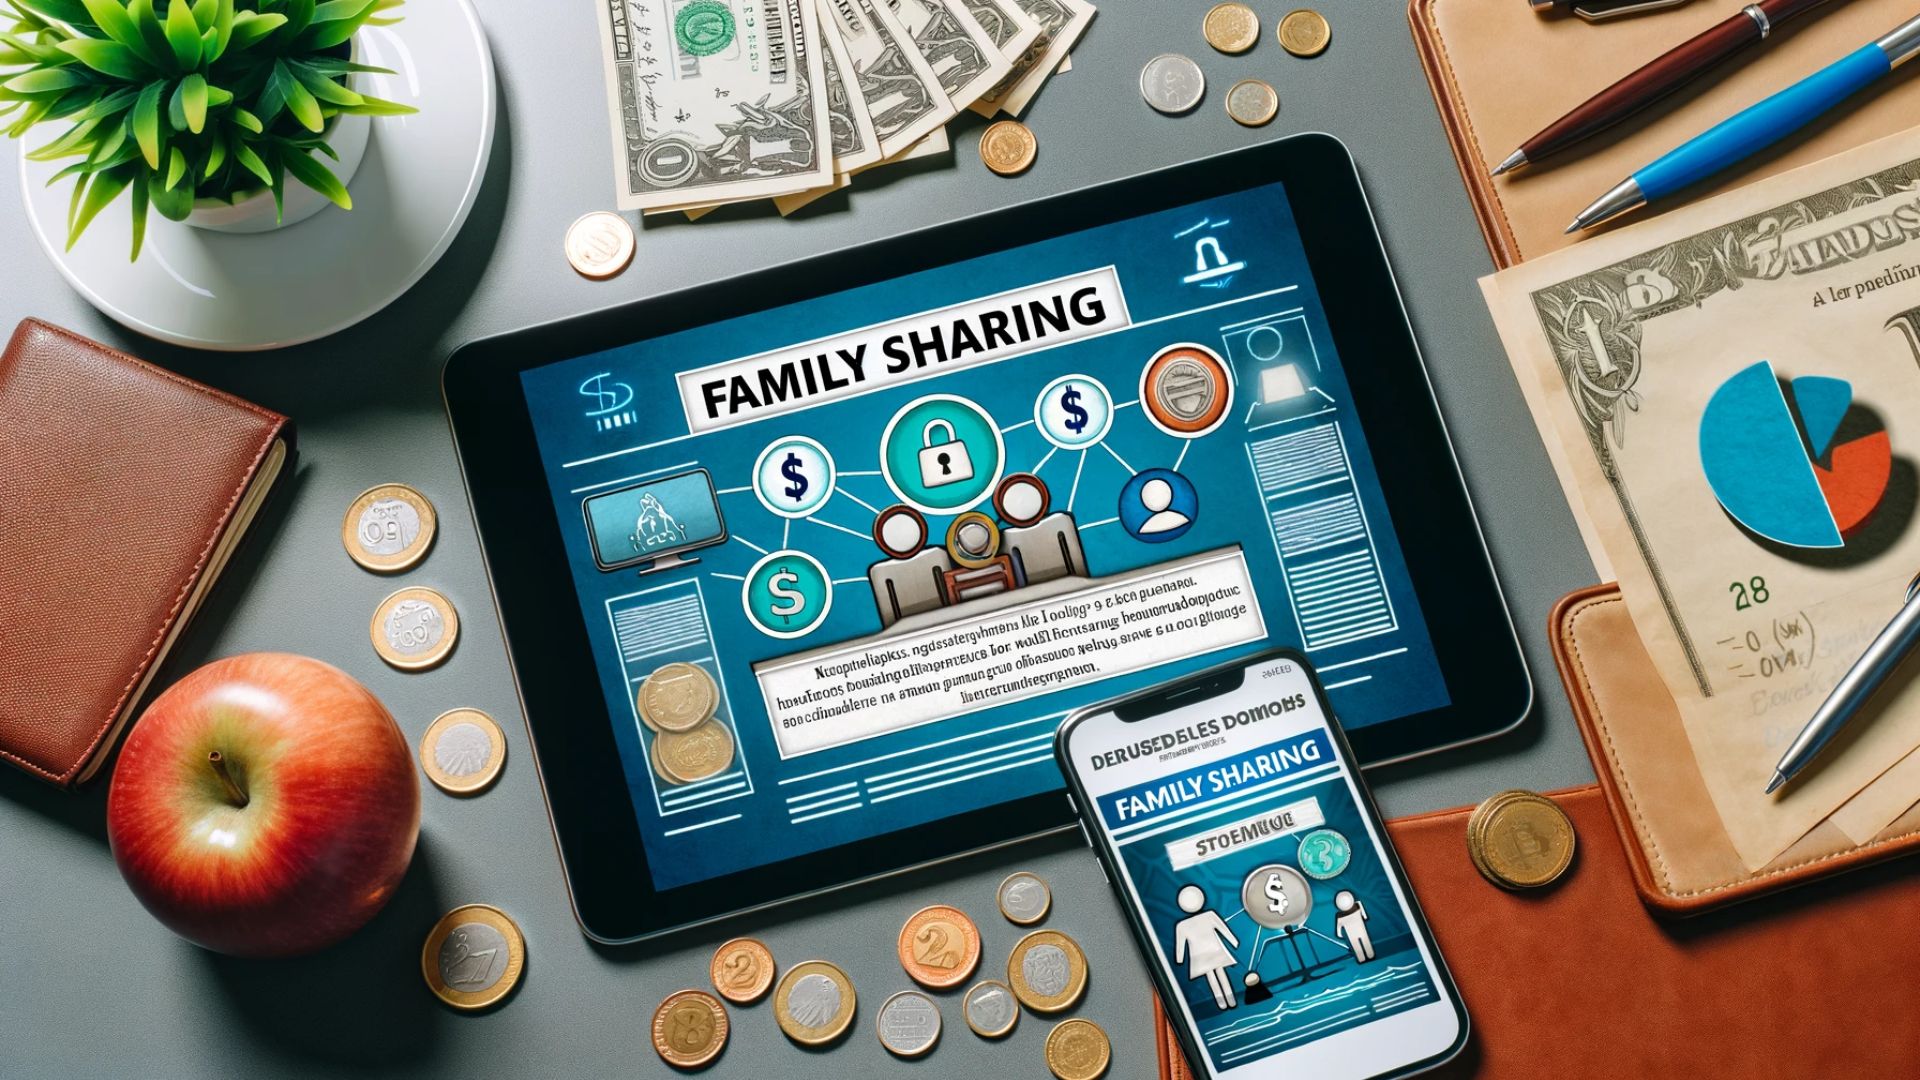 Apple 30 Payout Are You Eligible for the Family Sharing Settlement